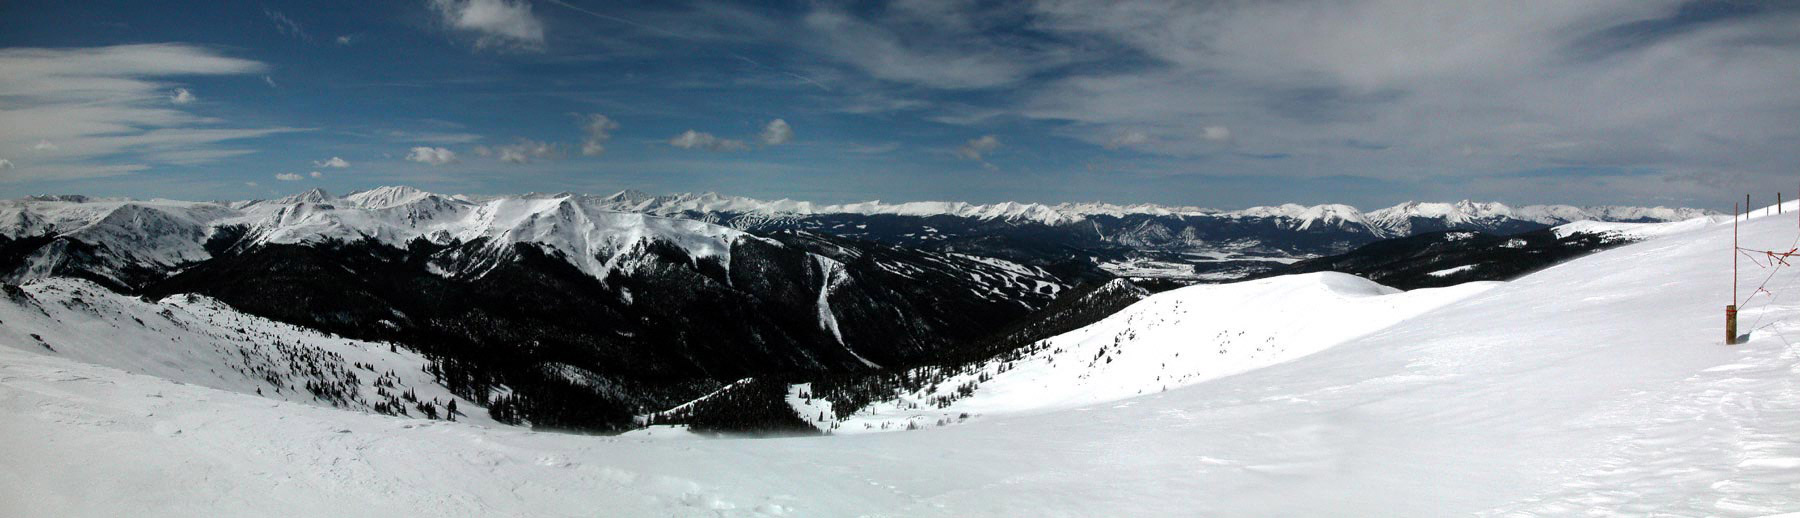 View from the top of ABasin looking west.  The closest ski runs are Keystone, the ones in the distance are Breckenridge.  Digital Image - March 2003